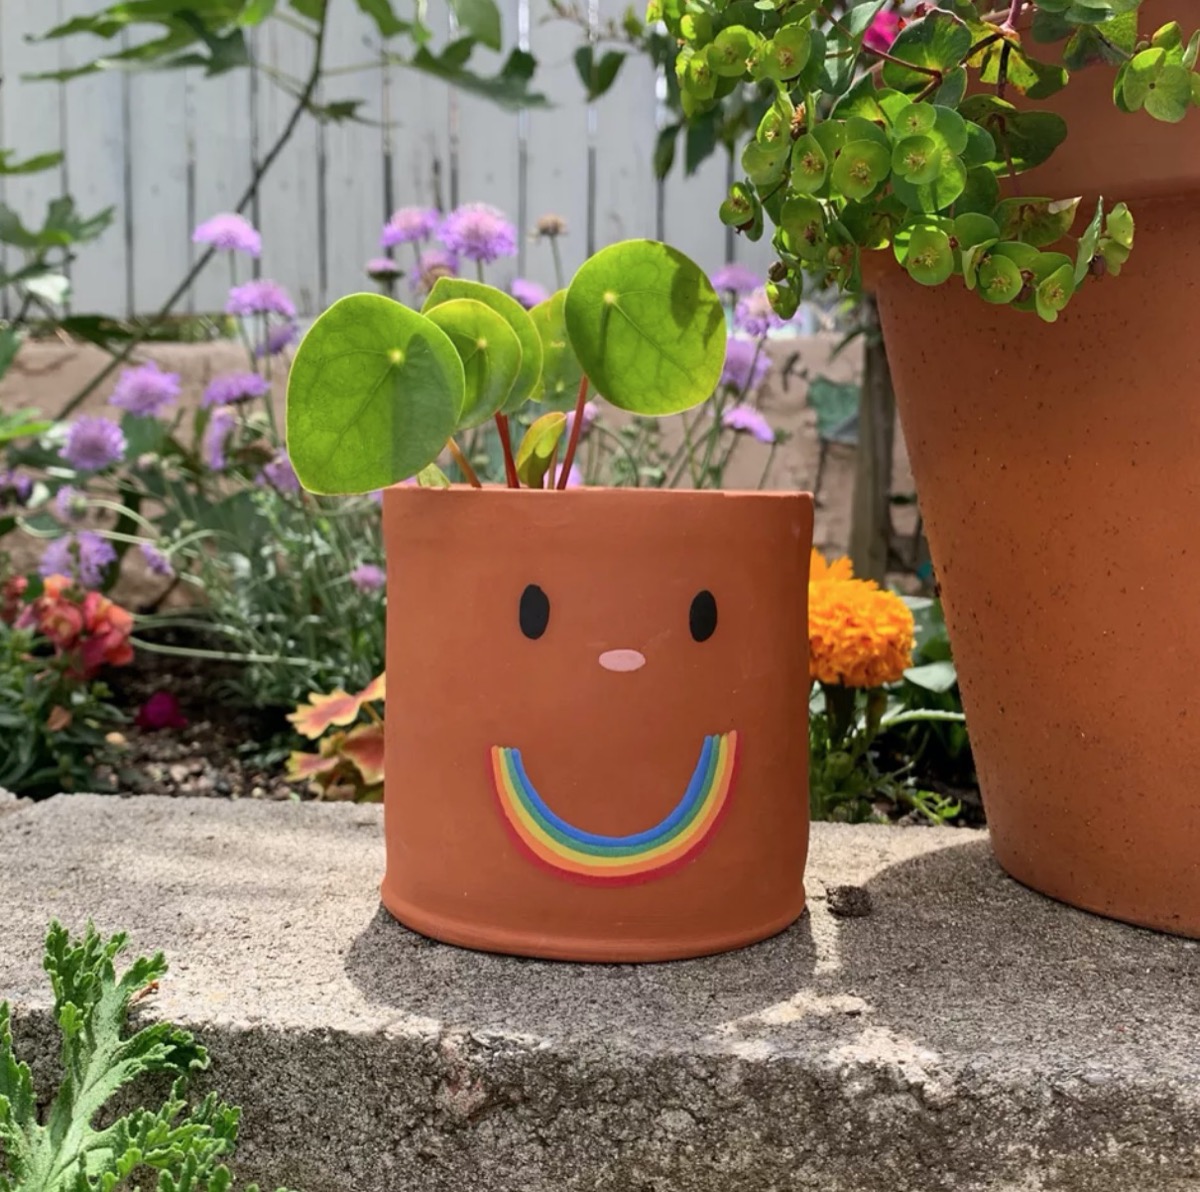 terra cotta planter with rainbow smiley face